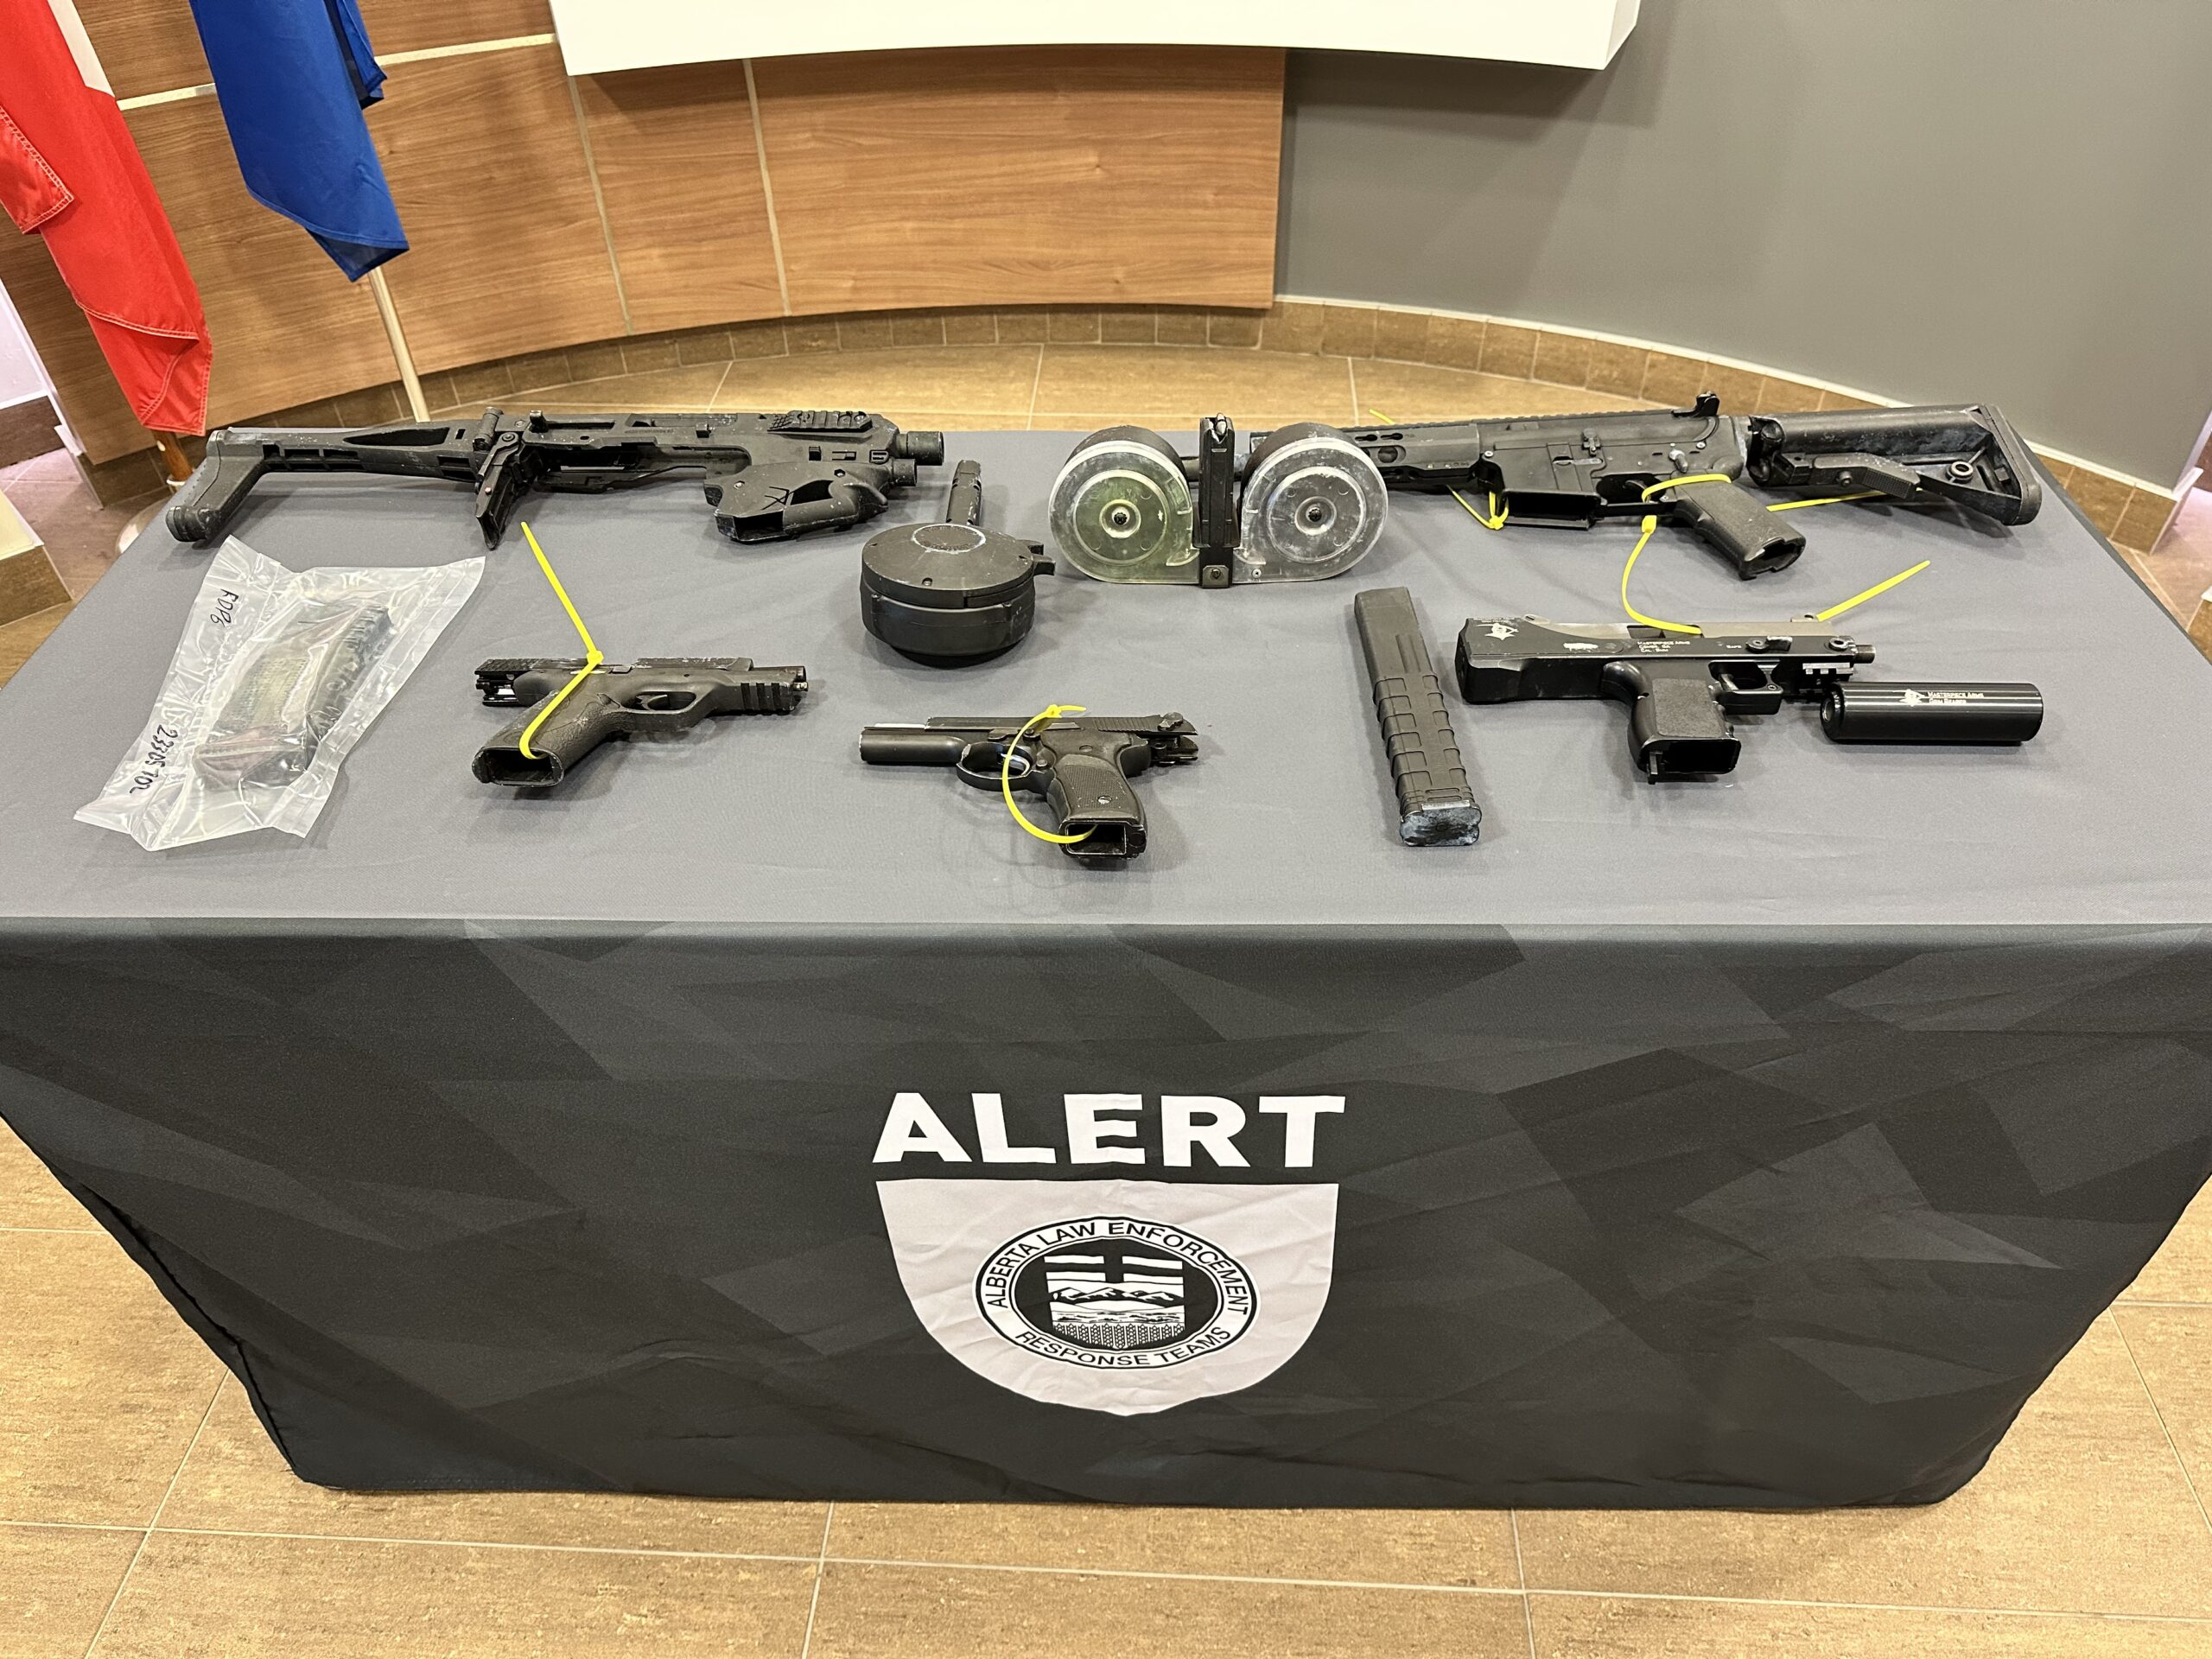 Firearms seized, 46 charges laid in Edmonton investigation